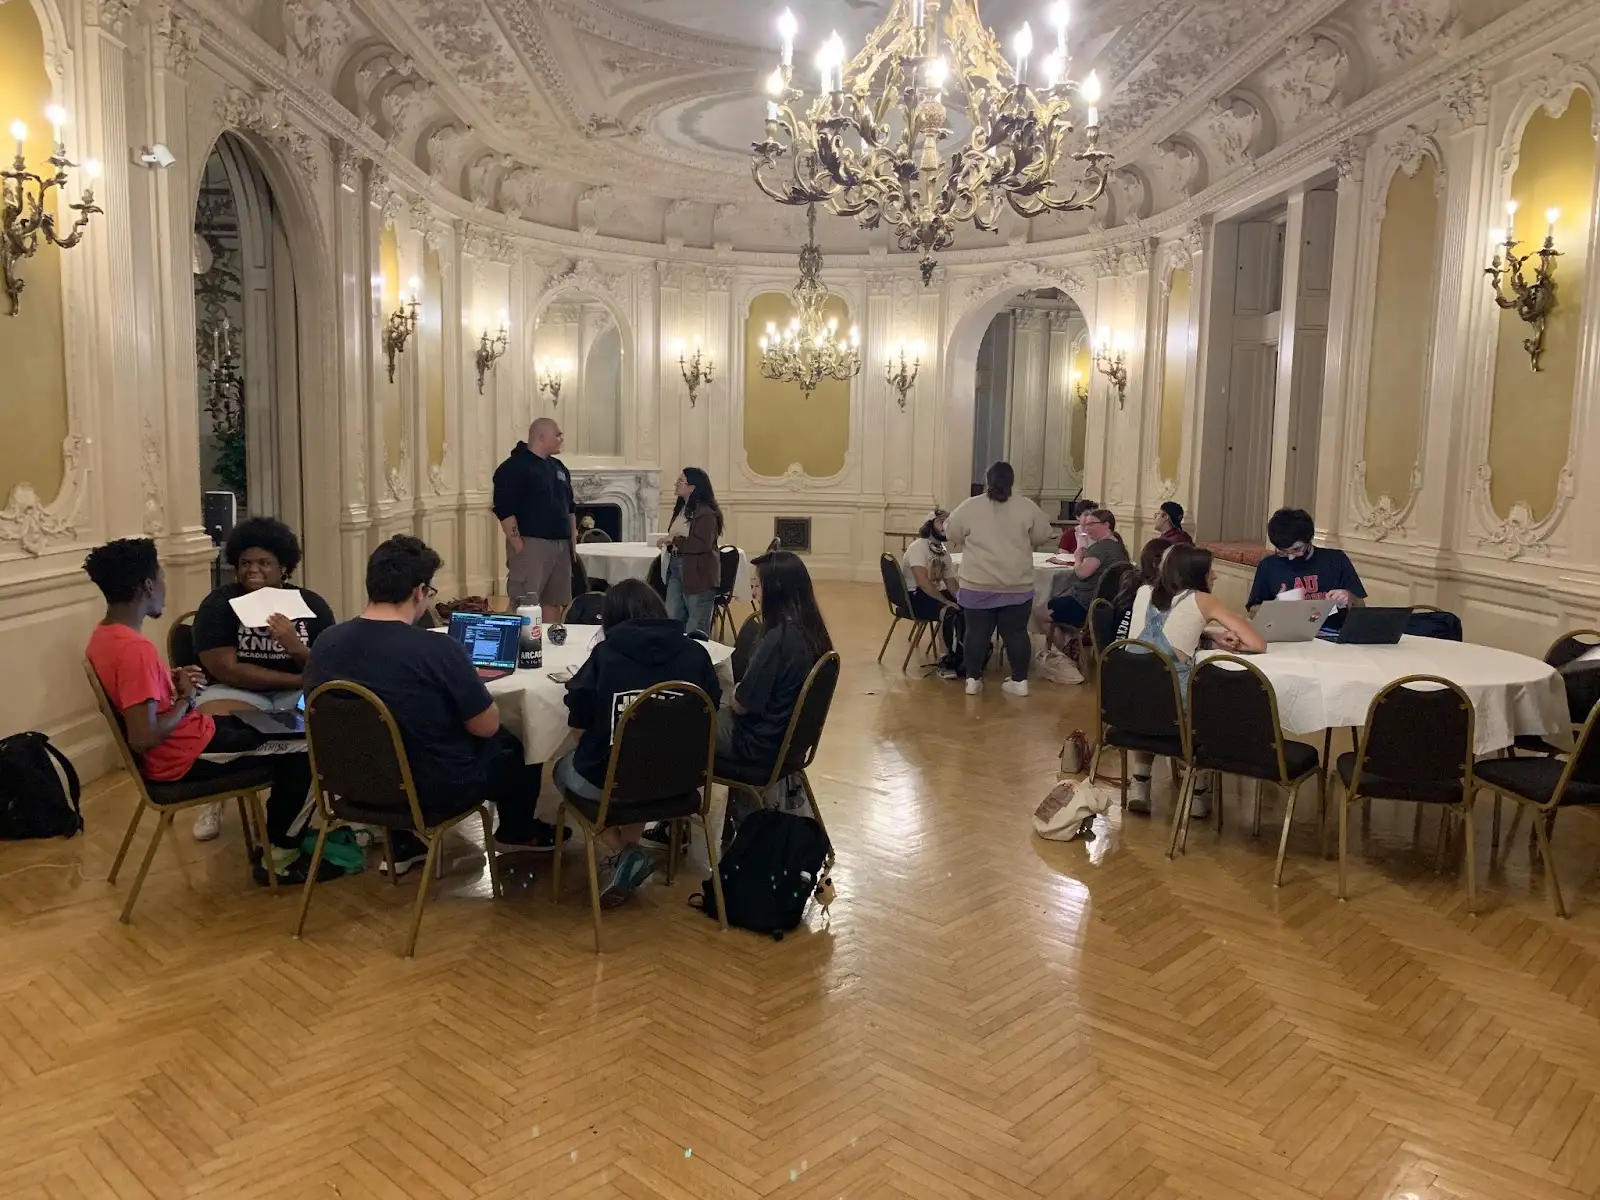 Students gathered in the Rose Room for rehearsals.